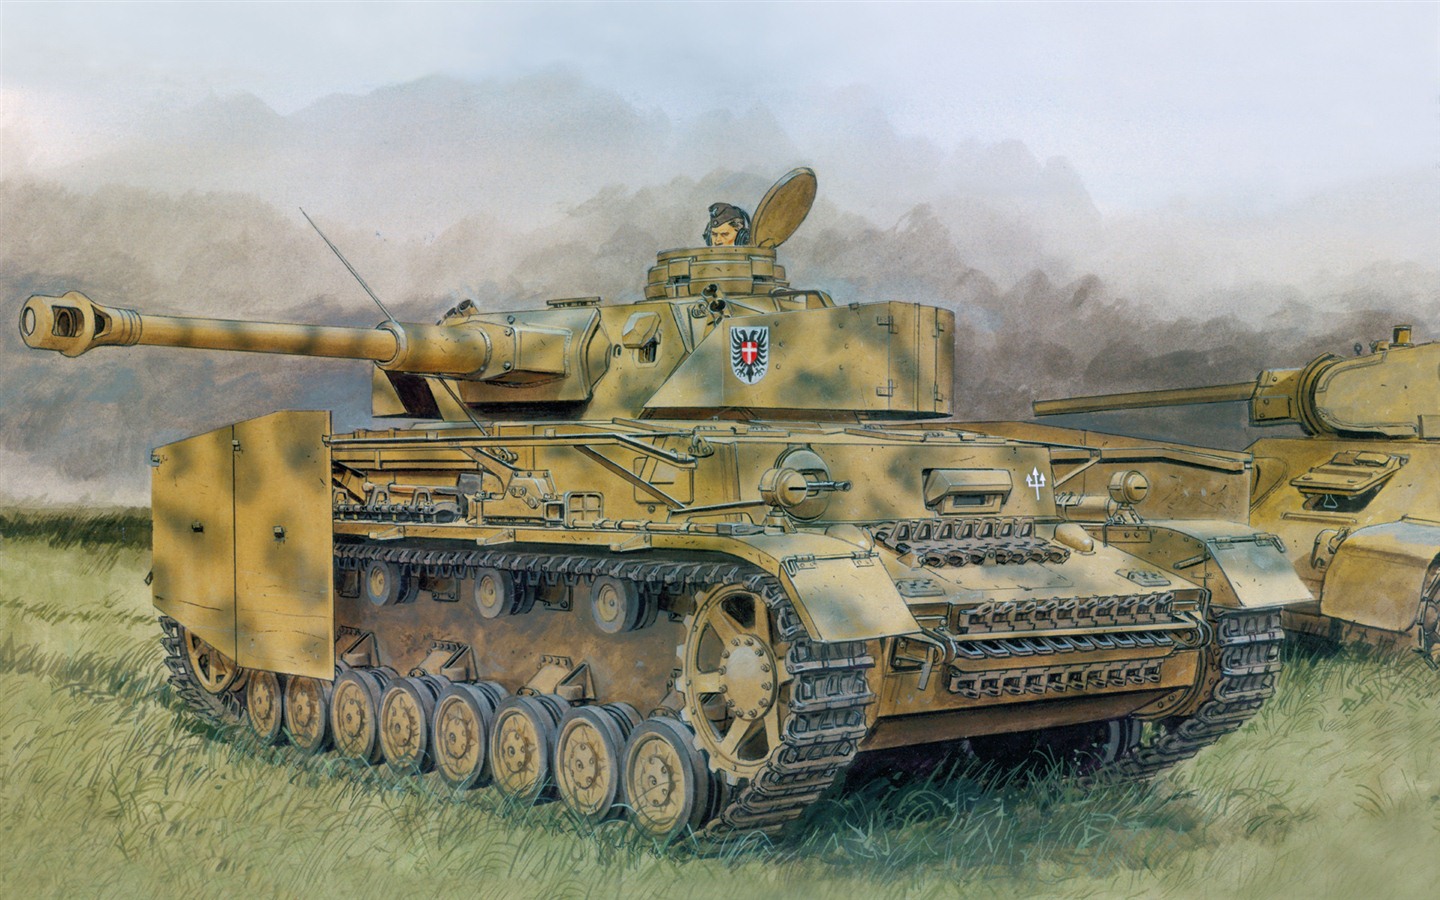 Military tanks, armored HD painting wallpapers #14 - 1440x900